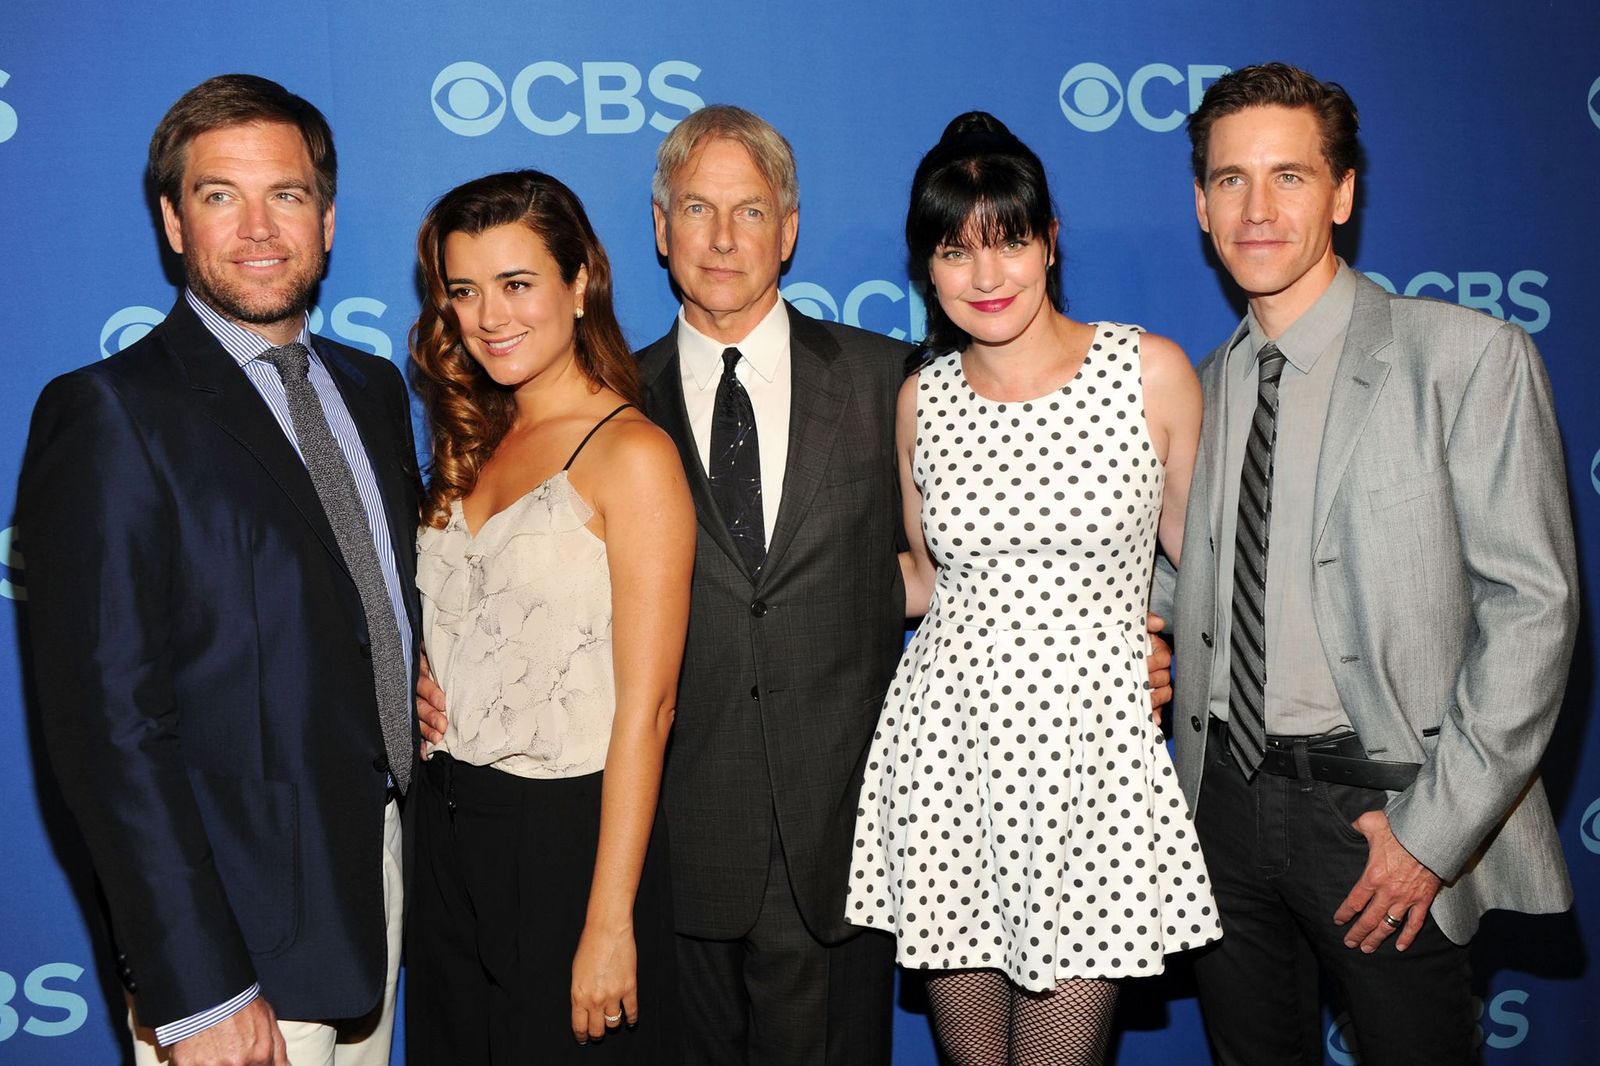 Cast of NCIS Michael Weatherly, Cote de Pable, Mark Harmon, Pauley Perrette and Brian Dietzen at CBS 2013 Upfront Presentation at The Tent at Lincoln Center on May 15, 2013 | Photo: Getty Images